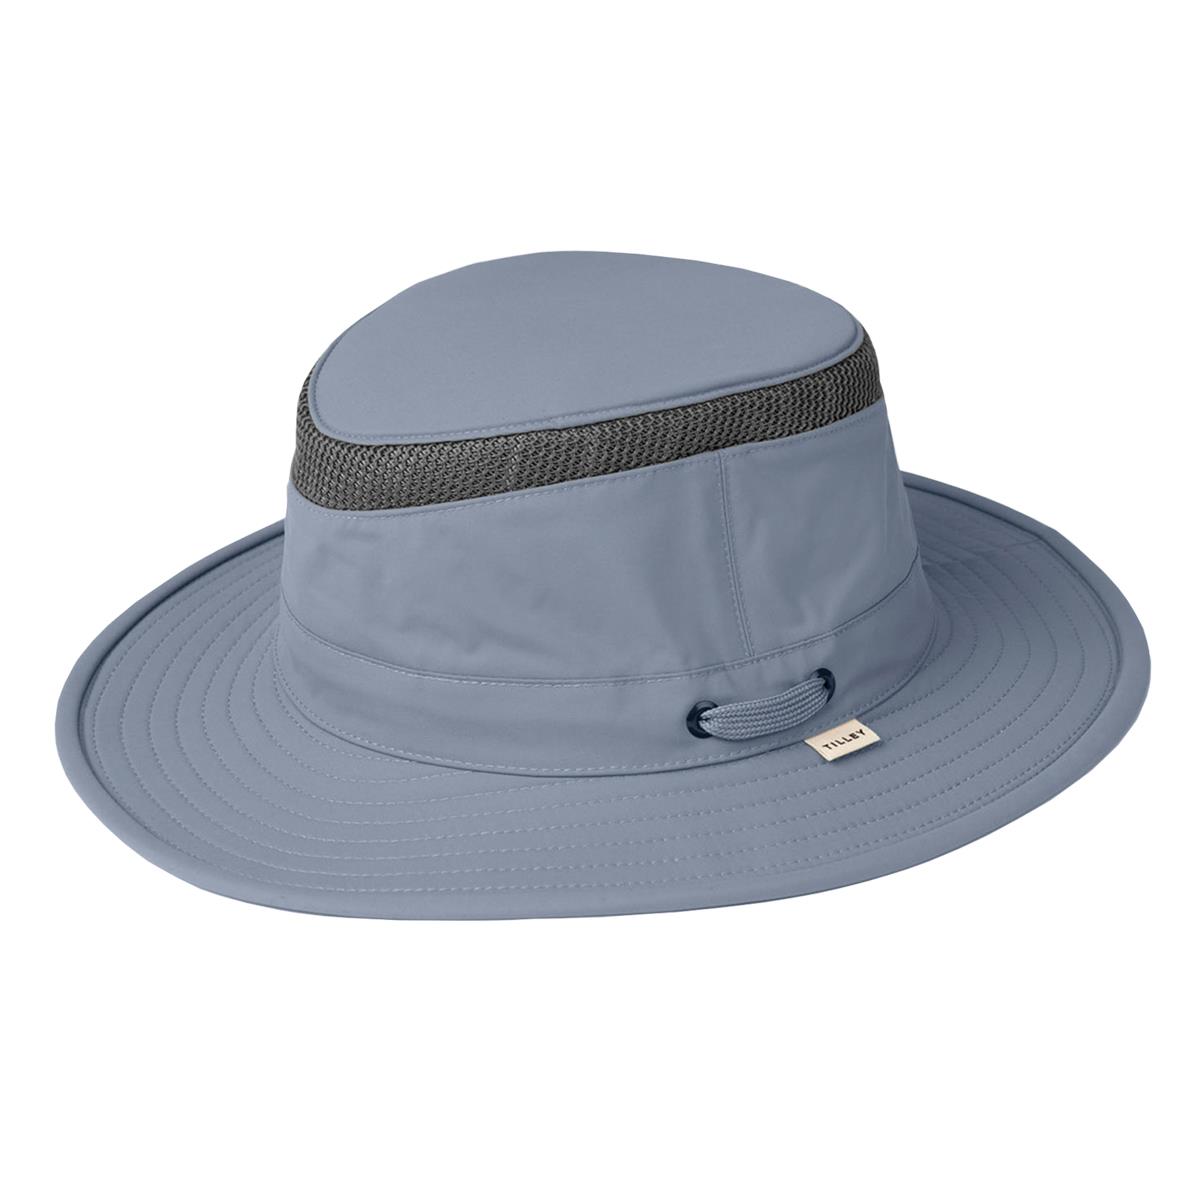 What's the styling of the Tilley LTM5 hat?